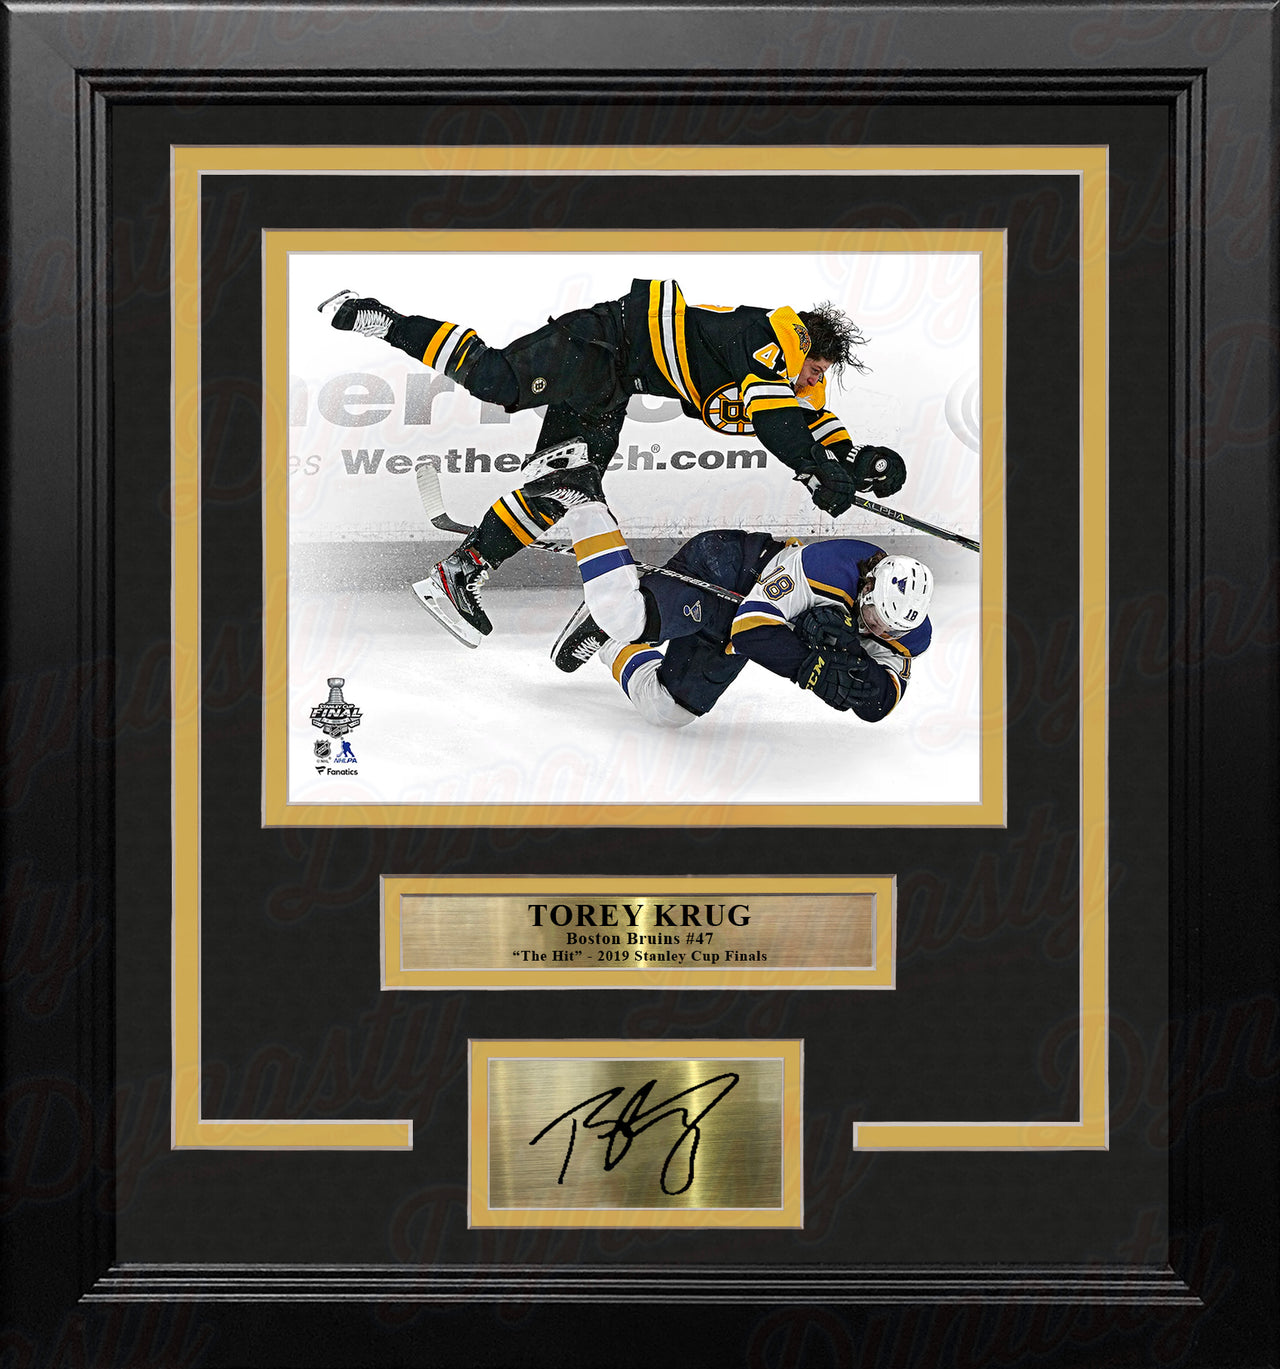 Torey Krug Boston Bruins 2019 Stanley Cup Finals Hit 8x10 Framed Photo with Engraved Autograph - Dynasty Sports & Framing 